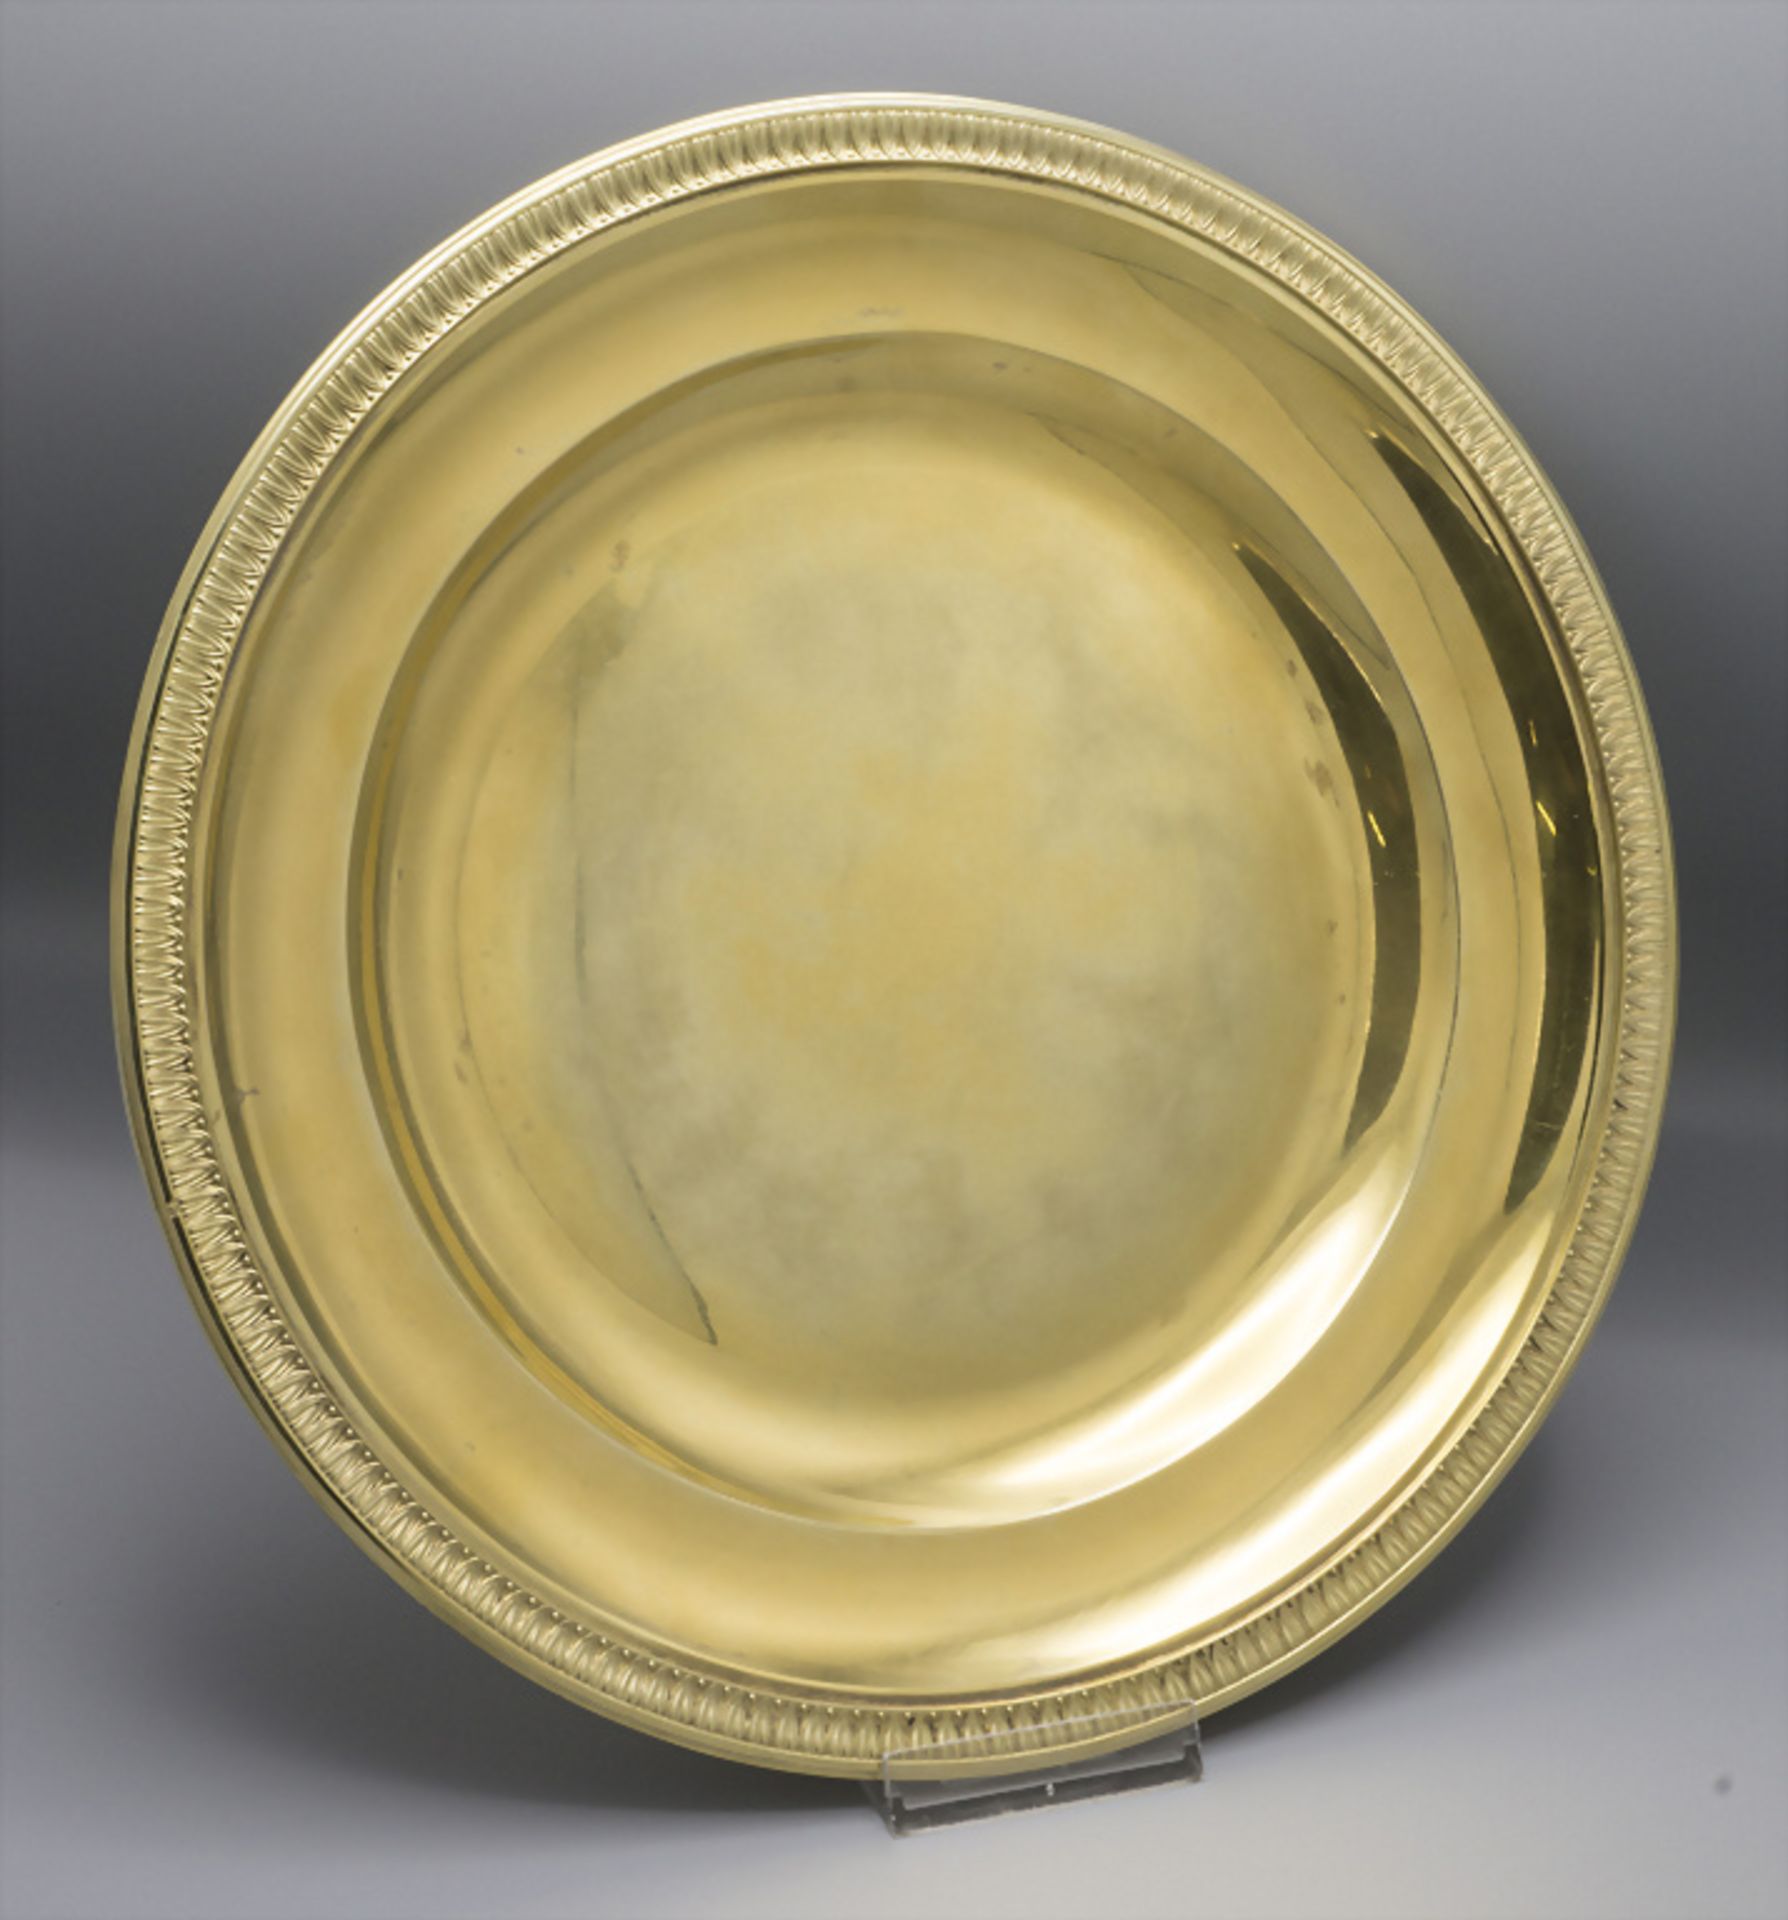 Deckelterrine auf Presentoire / A tureen with cover and plate, Emile Puiforcat, Paris, nach 1857 - Image 5 of 14